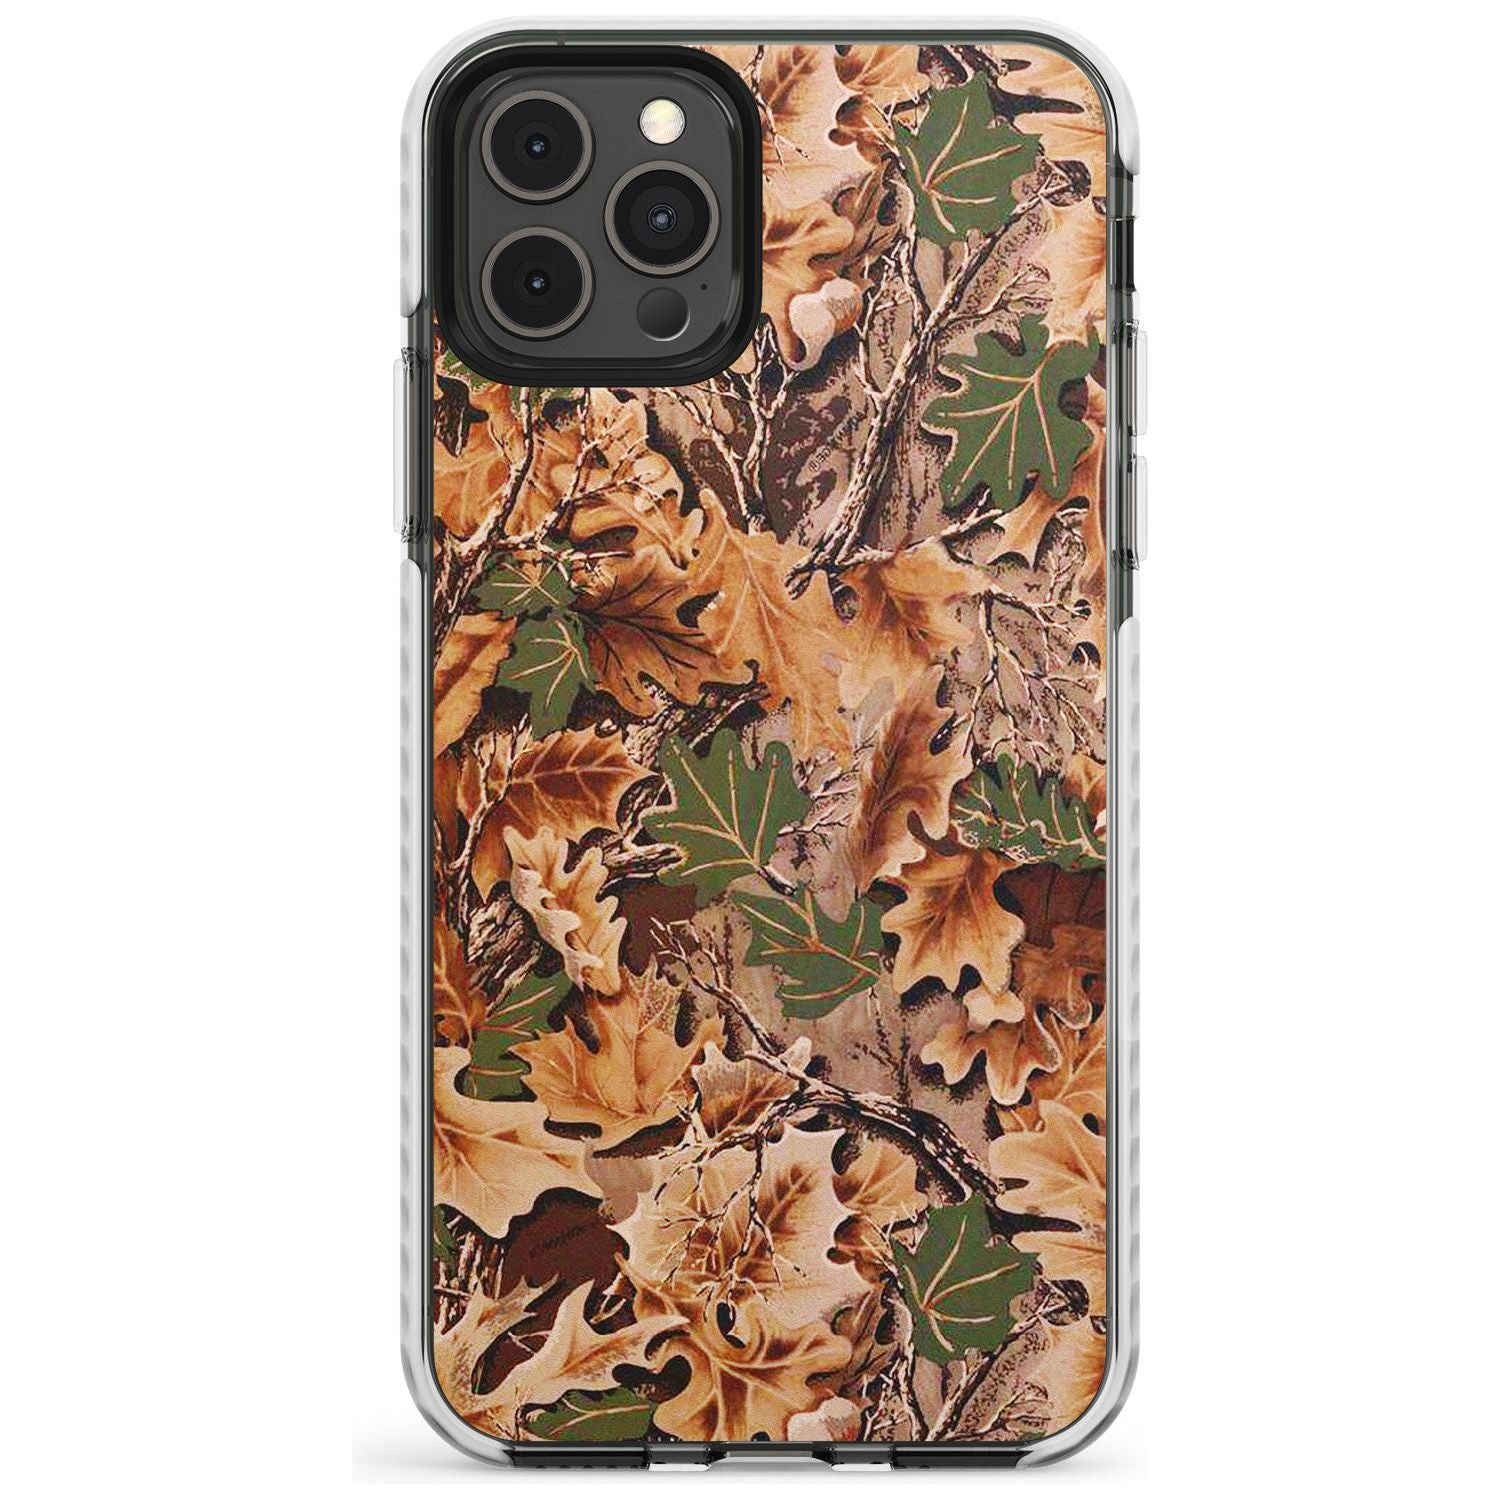 Leaves Camo Impact Phone Case for iPhone 11 Pro Max